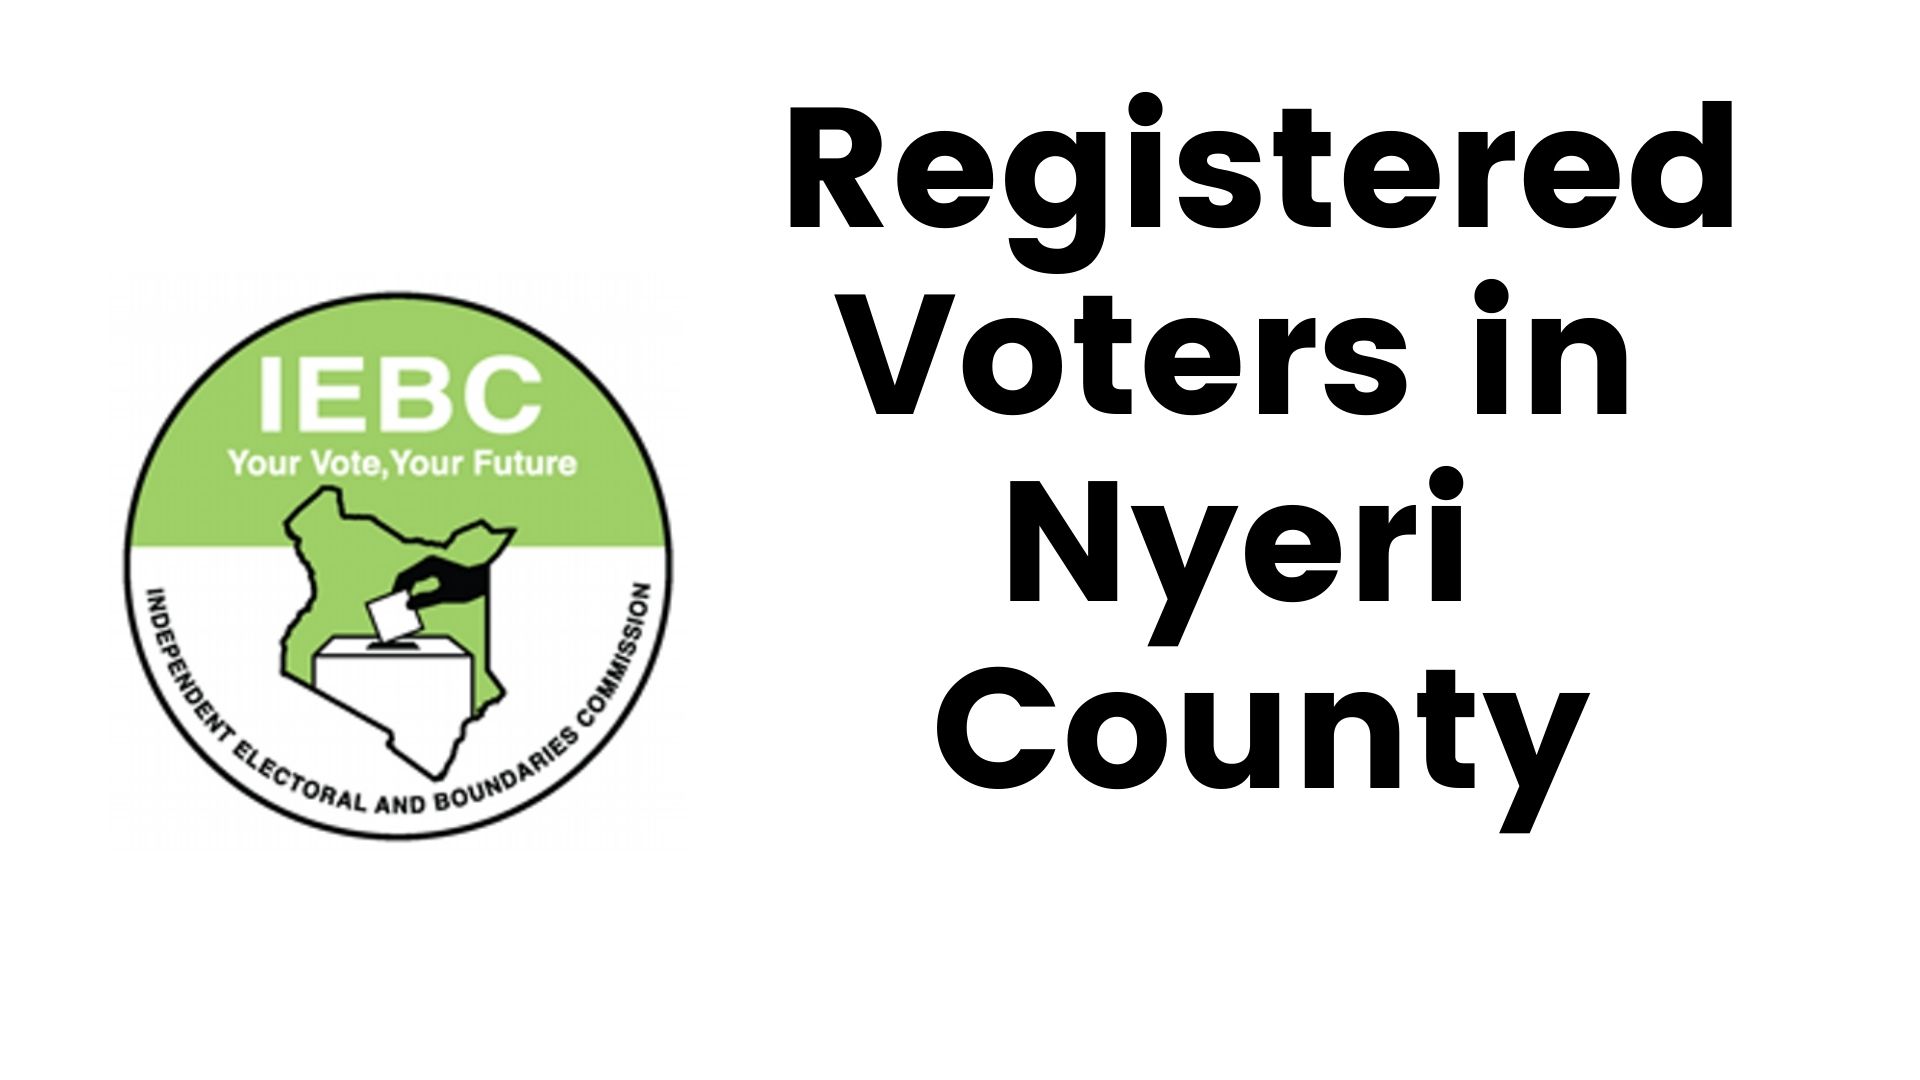 IEBC Nyeri County Registered Voters (Constituency, Wards)